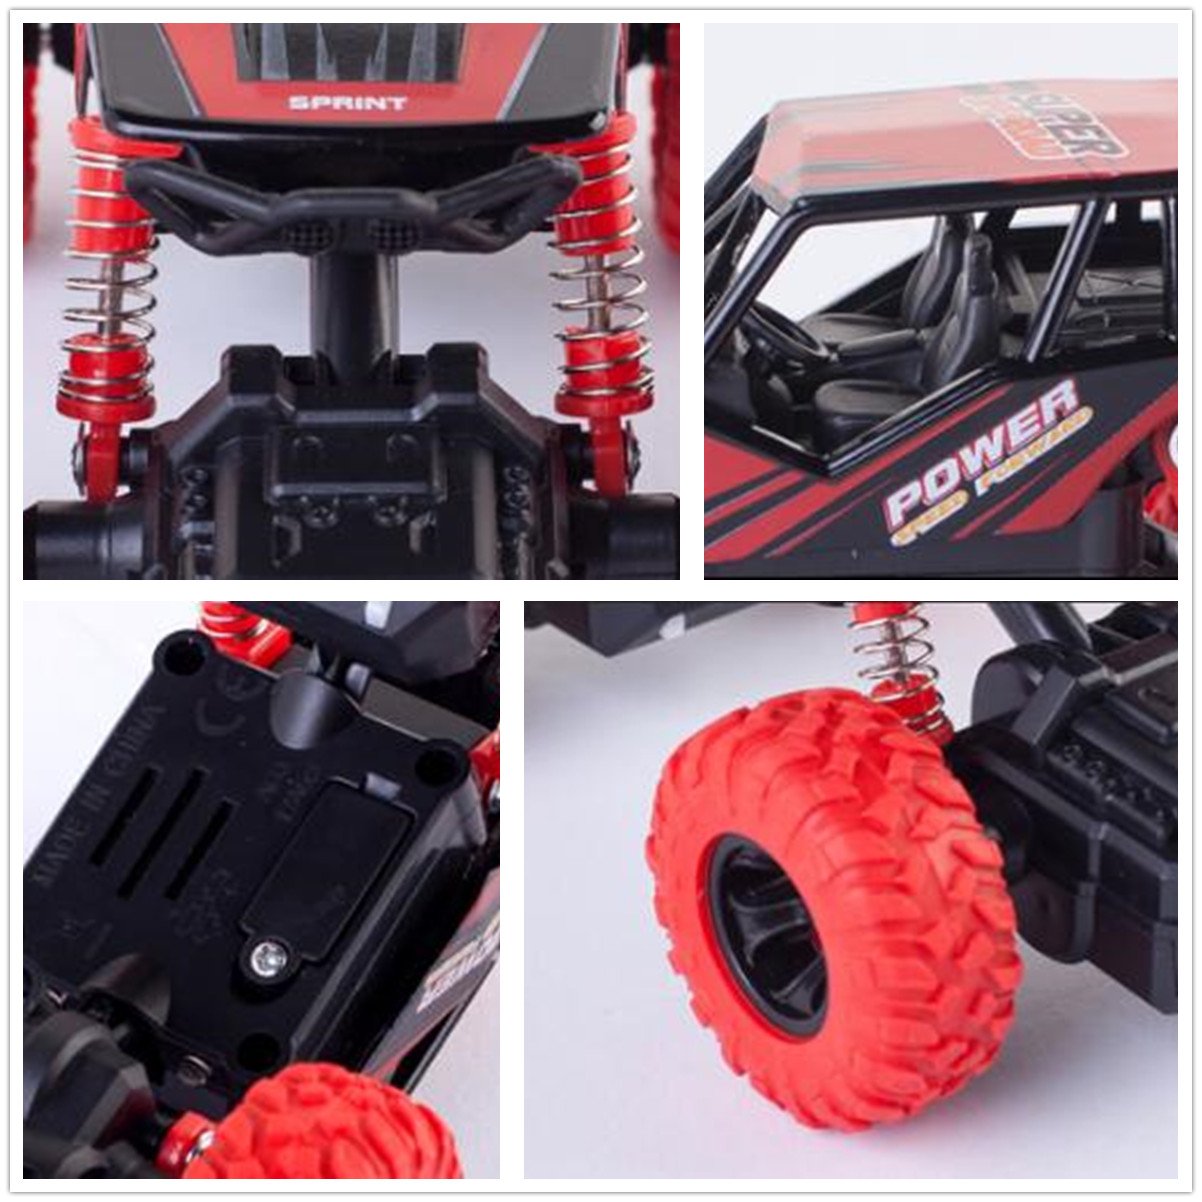 Diecast Truck Off-Road Vehicle